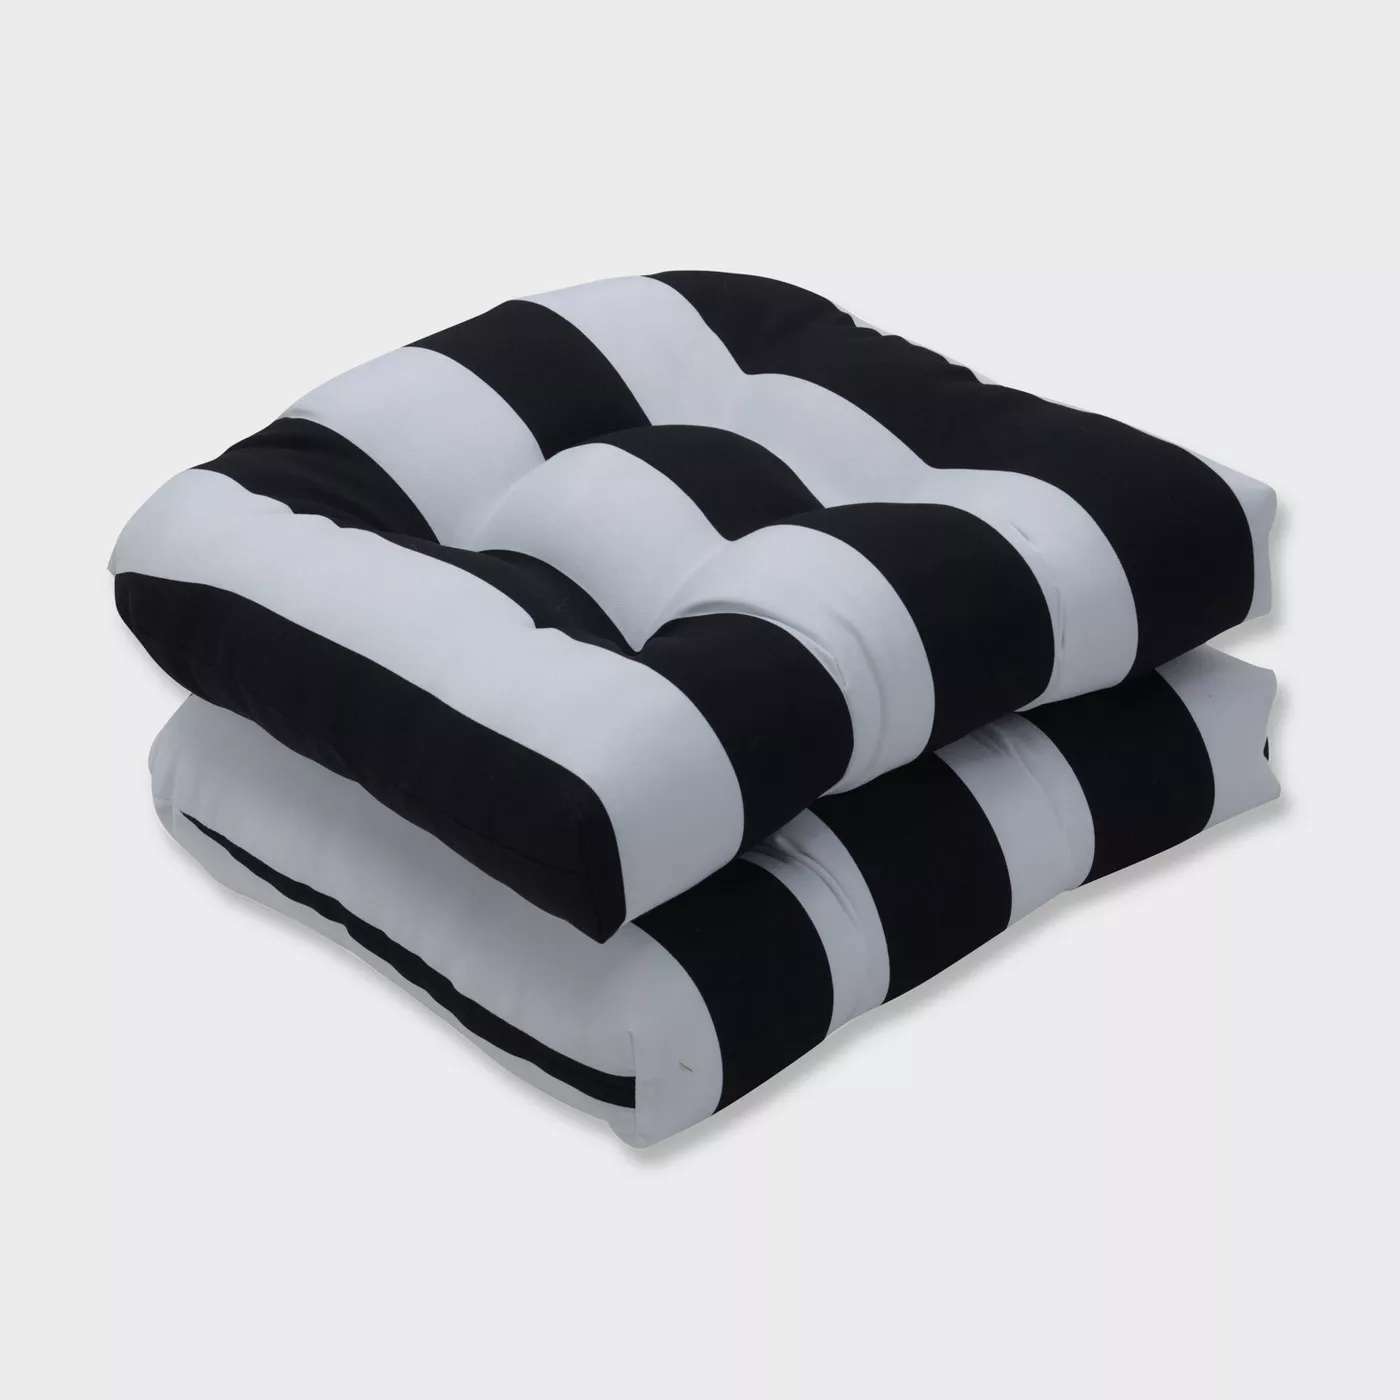 2pk Cabana Stripe Wicker Outdoor Seat Cushions Black - Pillow Perfect - image 1 of 1